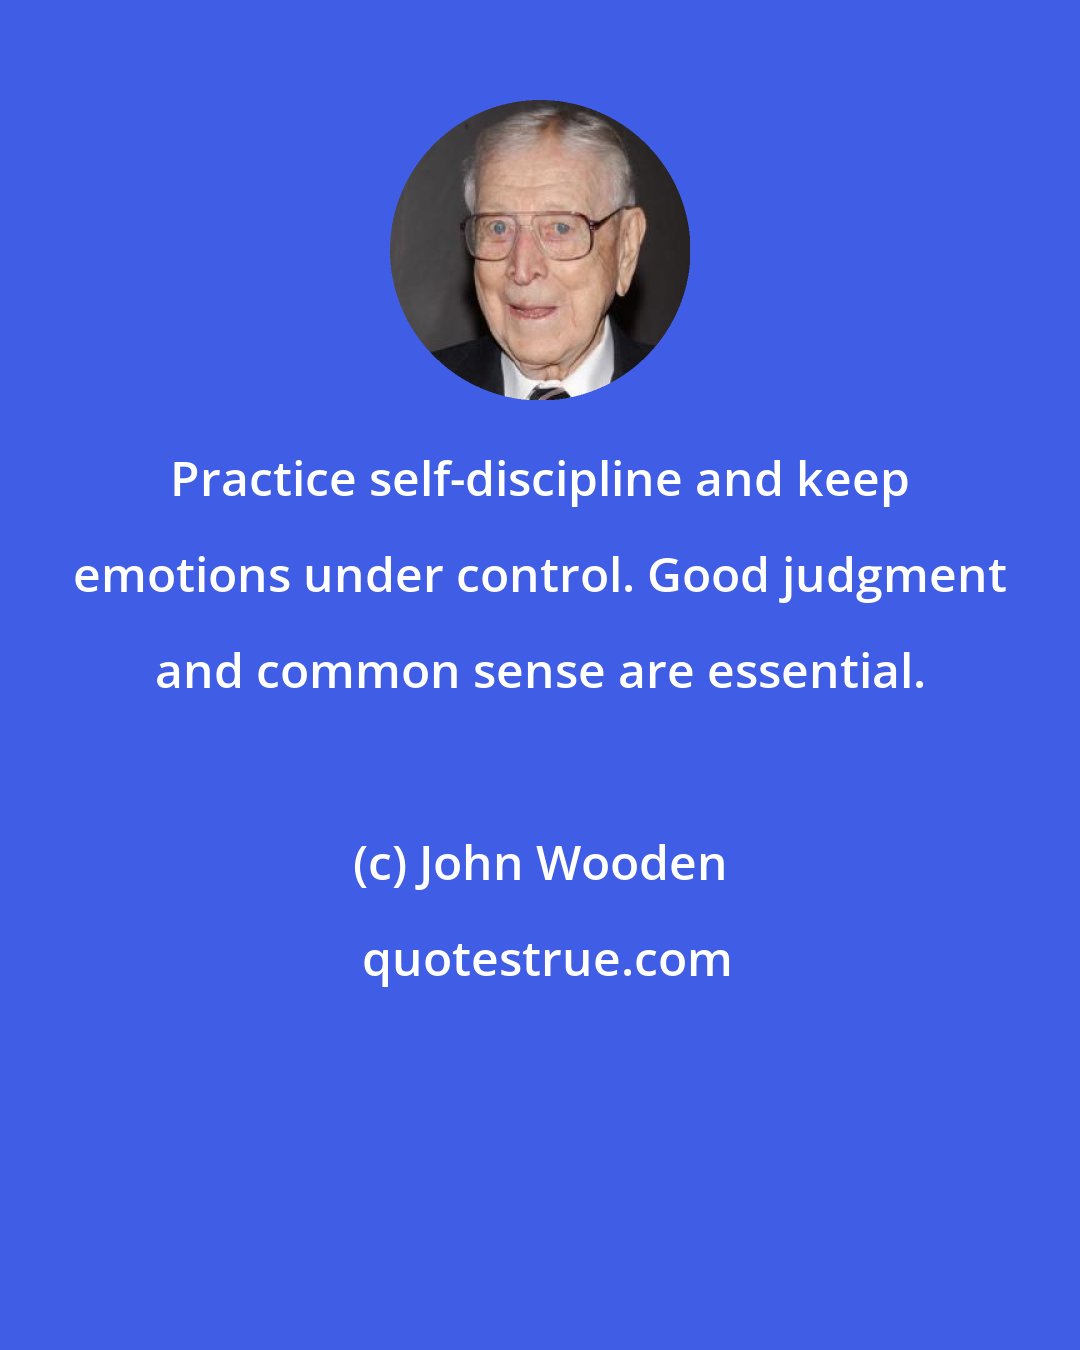 John Wooden: Practice self-discipline and keep emotions under control. Good judgment and common sense are essential.